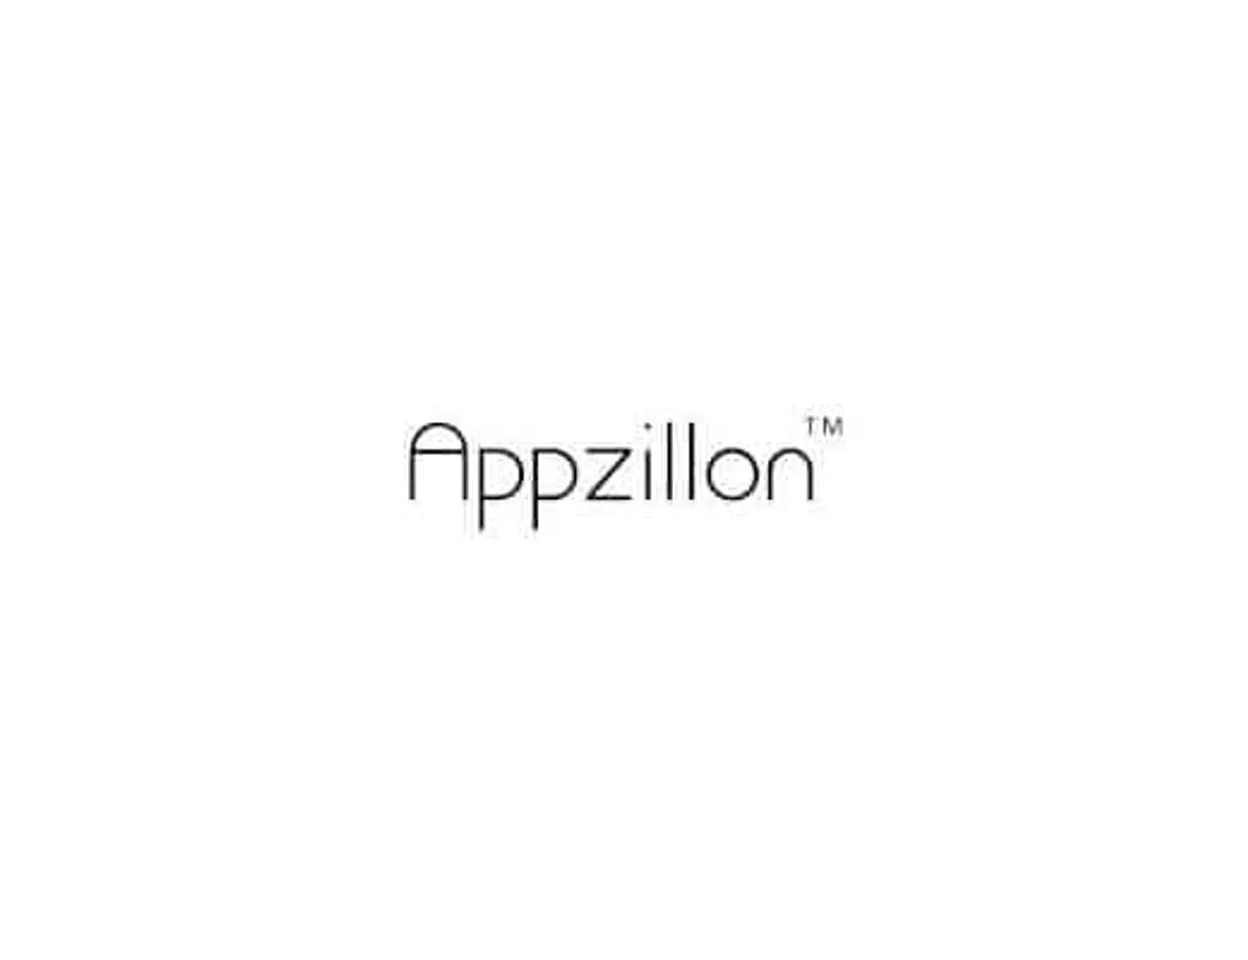 i-exceed upgraded Appzillion app with secure access